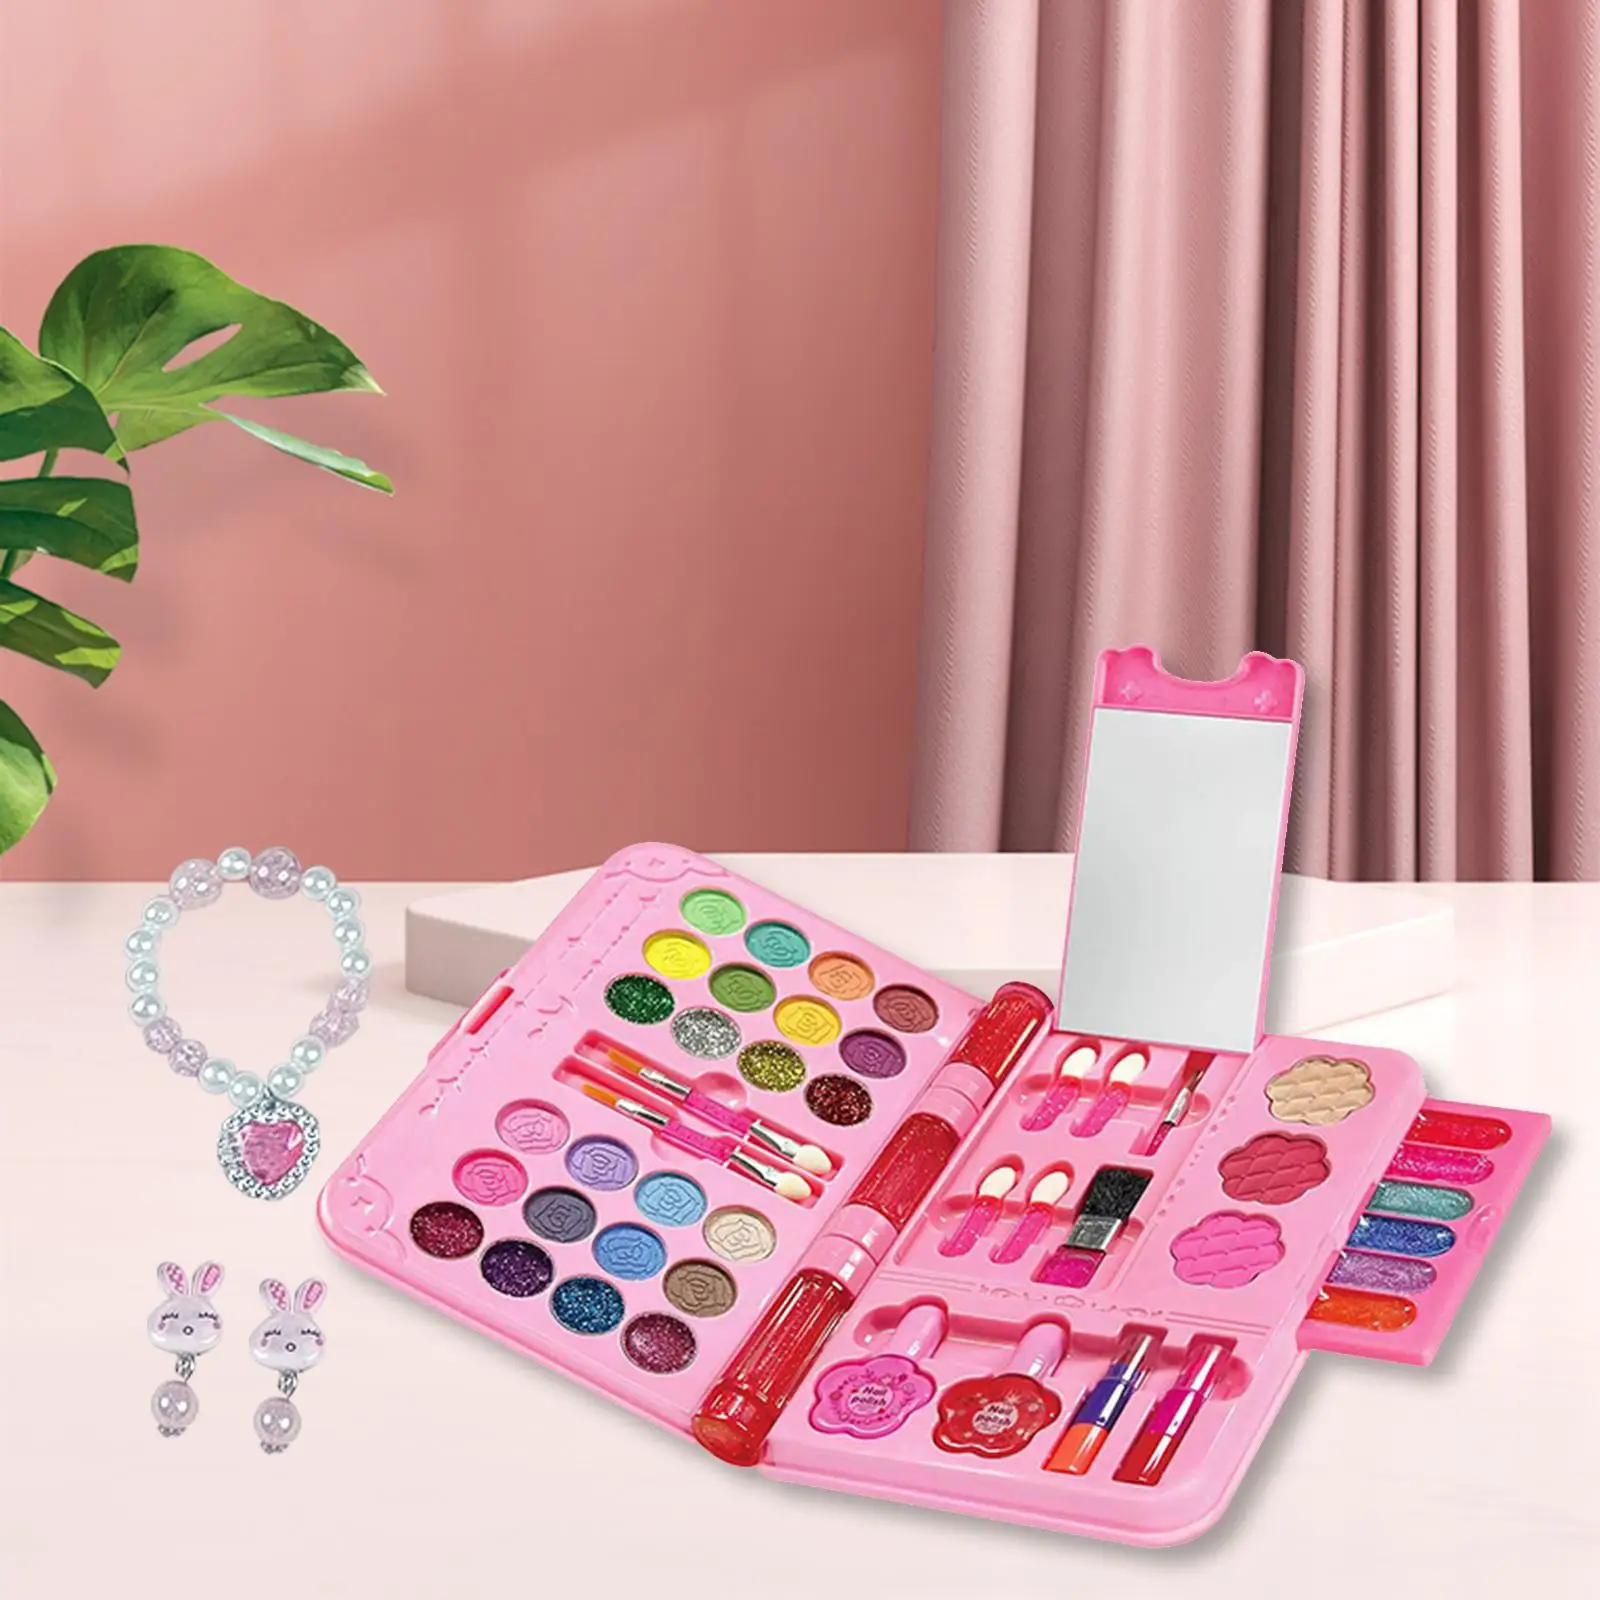 Children Makeup Playing Box Vanity Set Girls Toy Portable Role Playing Toy Cosmetic Toy Beauty Set for Kids Girls Birthday Gifts